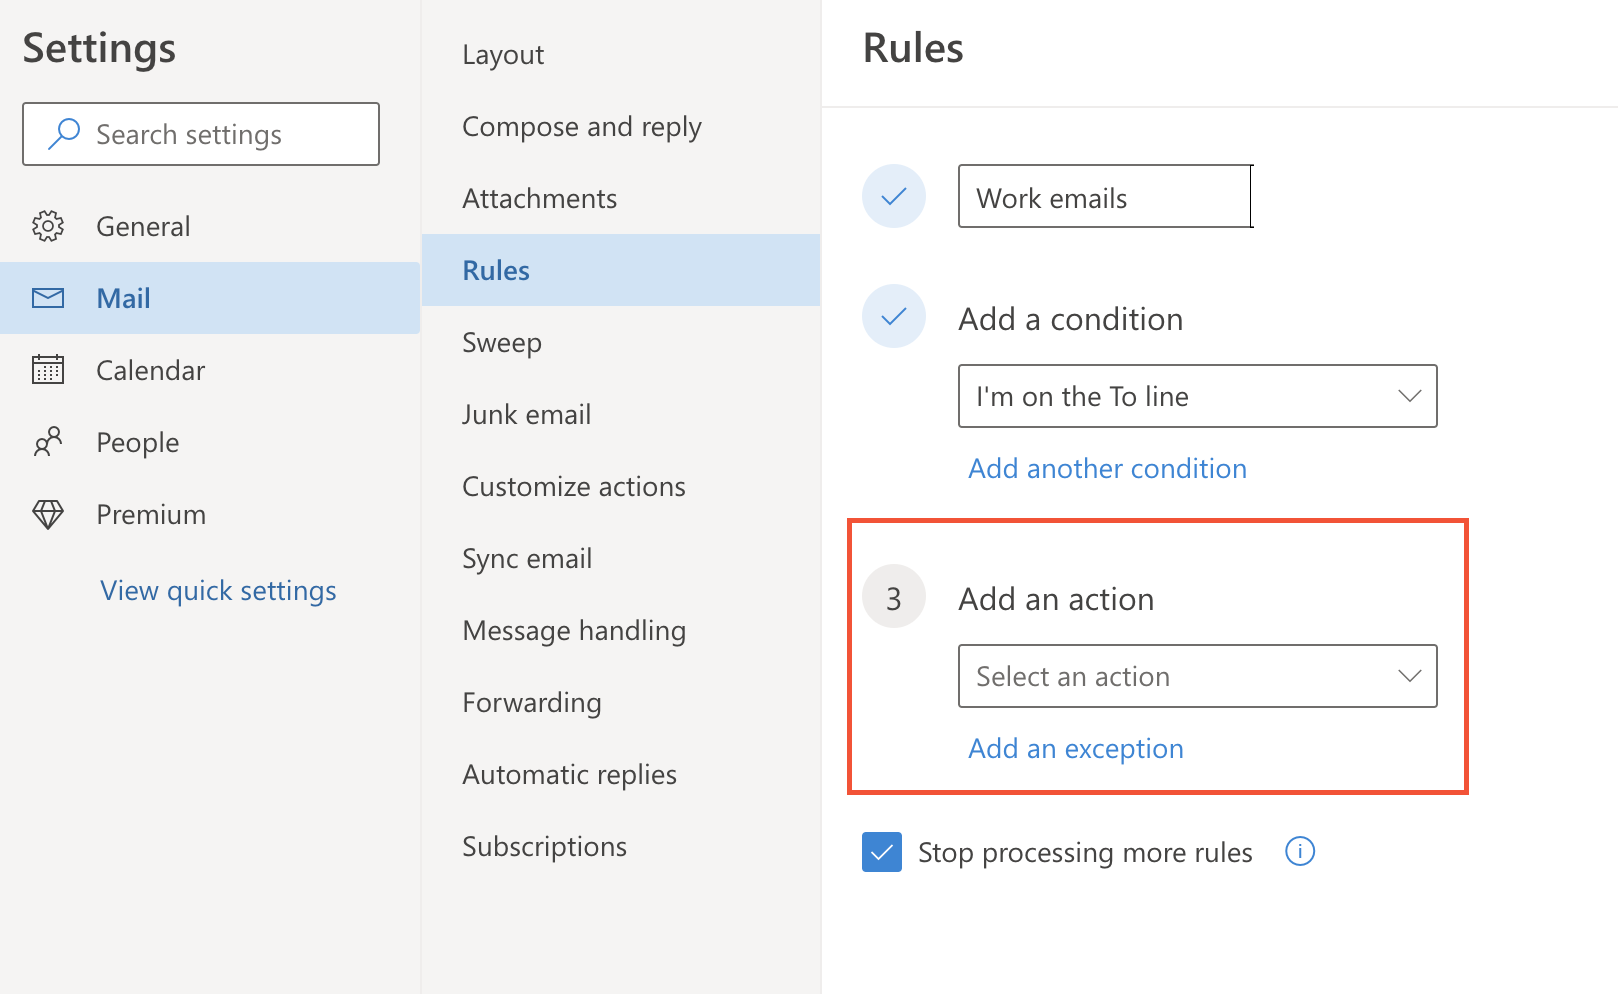 Outlook rules - add an action